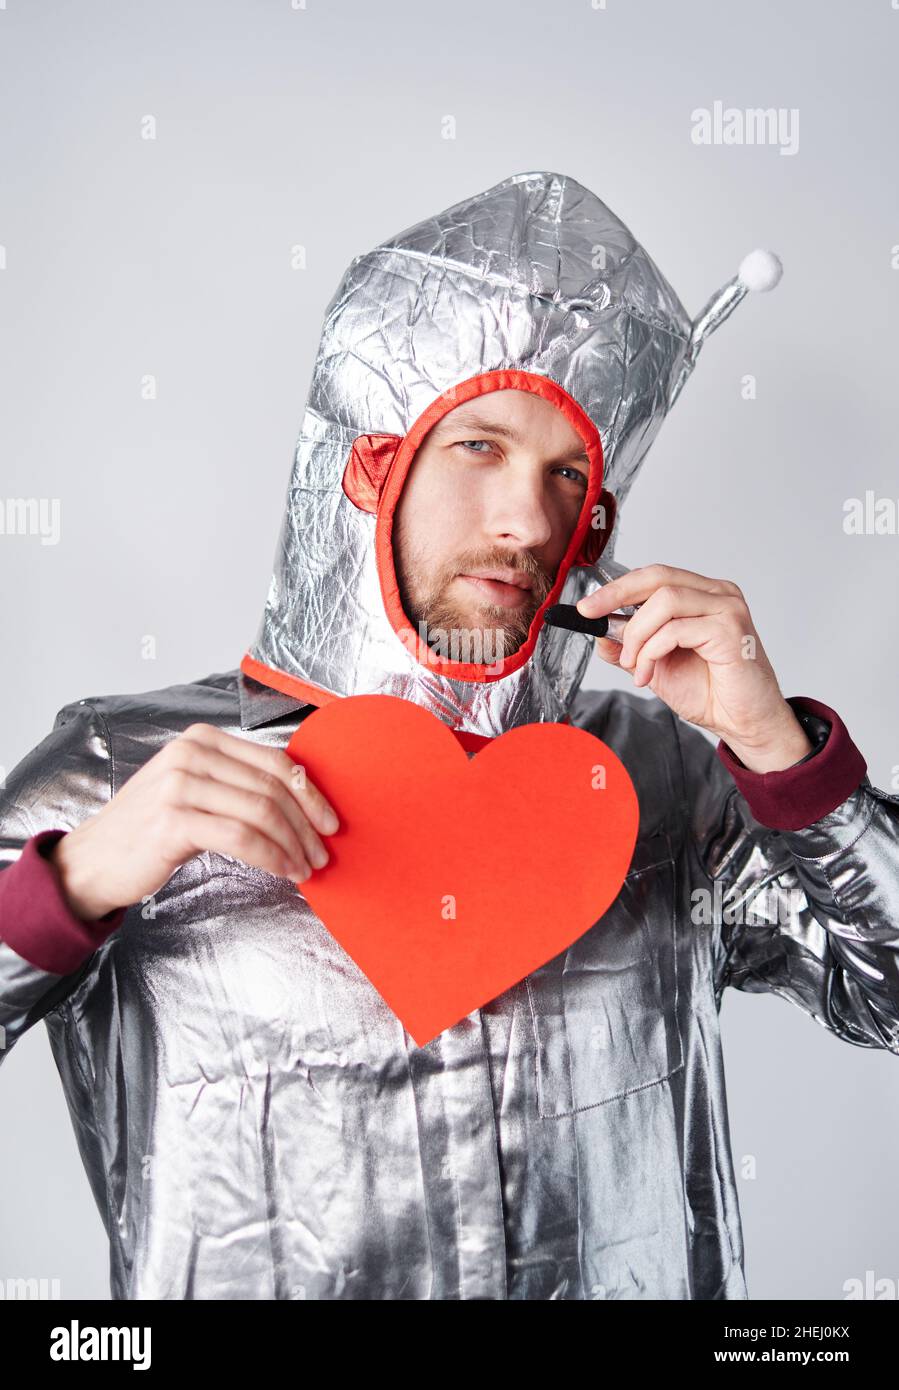 Male in spacesuit with red paper heart talking to somebody greeting with St. Valentine's Day. Romance, relationships concept. Young bearded astronaut man standing by the wall. High quality image Stock Photo